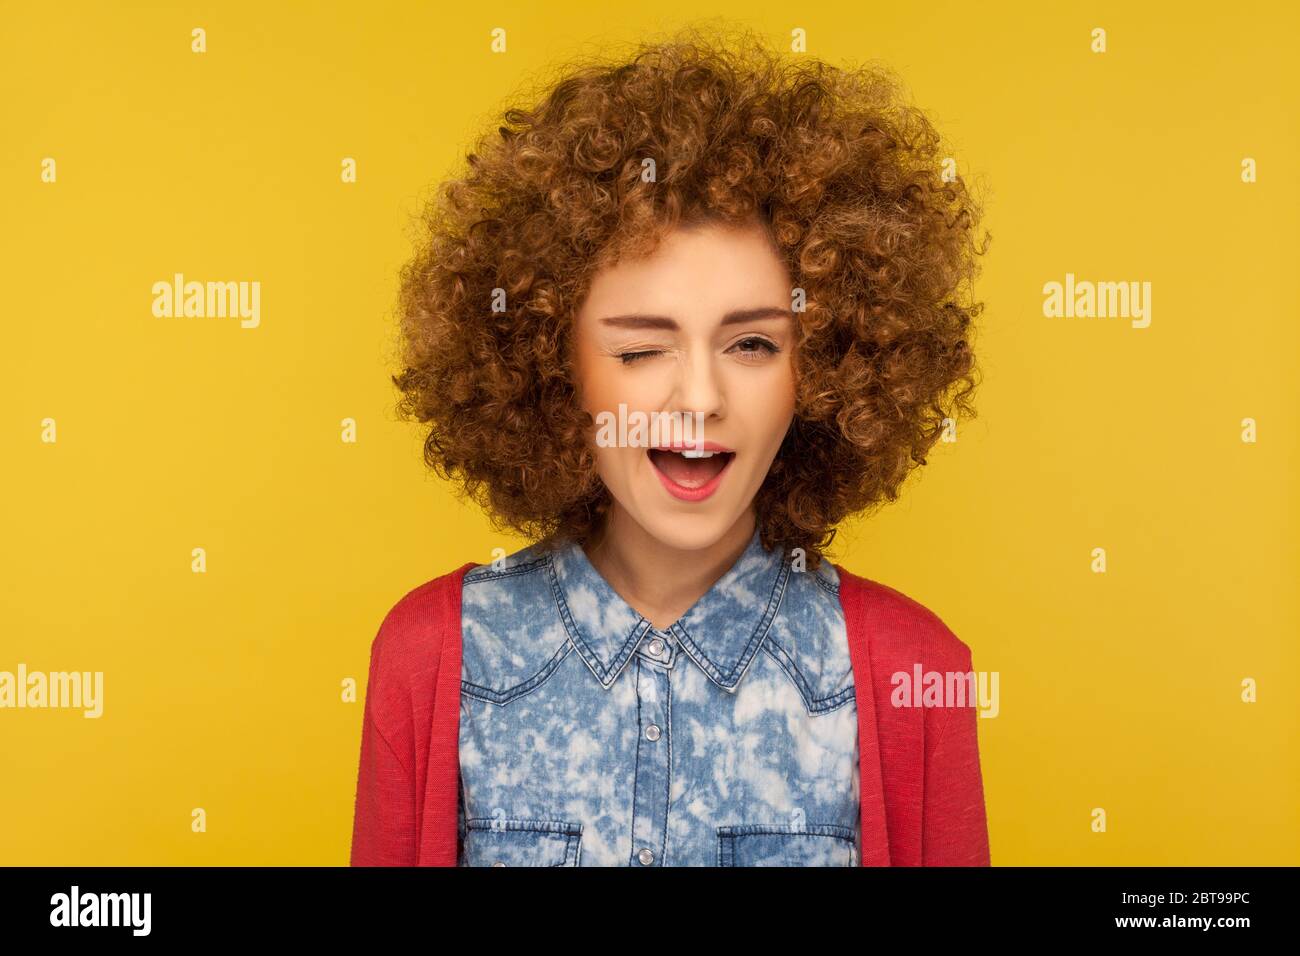 Closeup portrait of playful happy charming woman with curly hair in ...